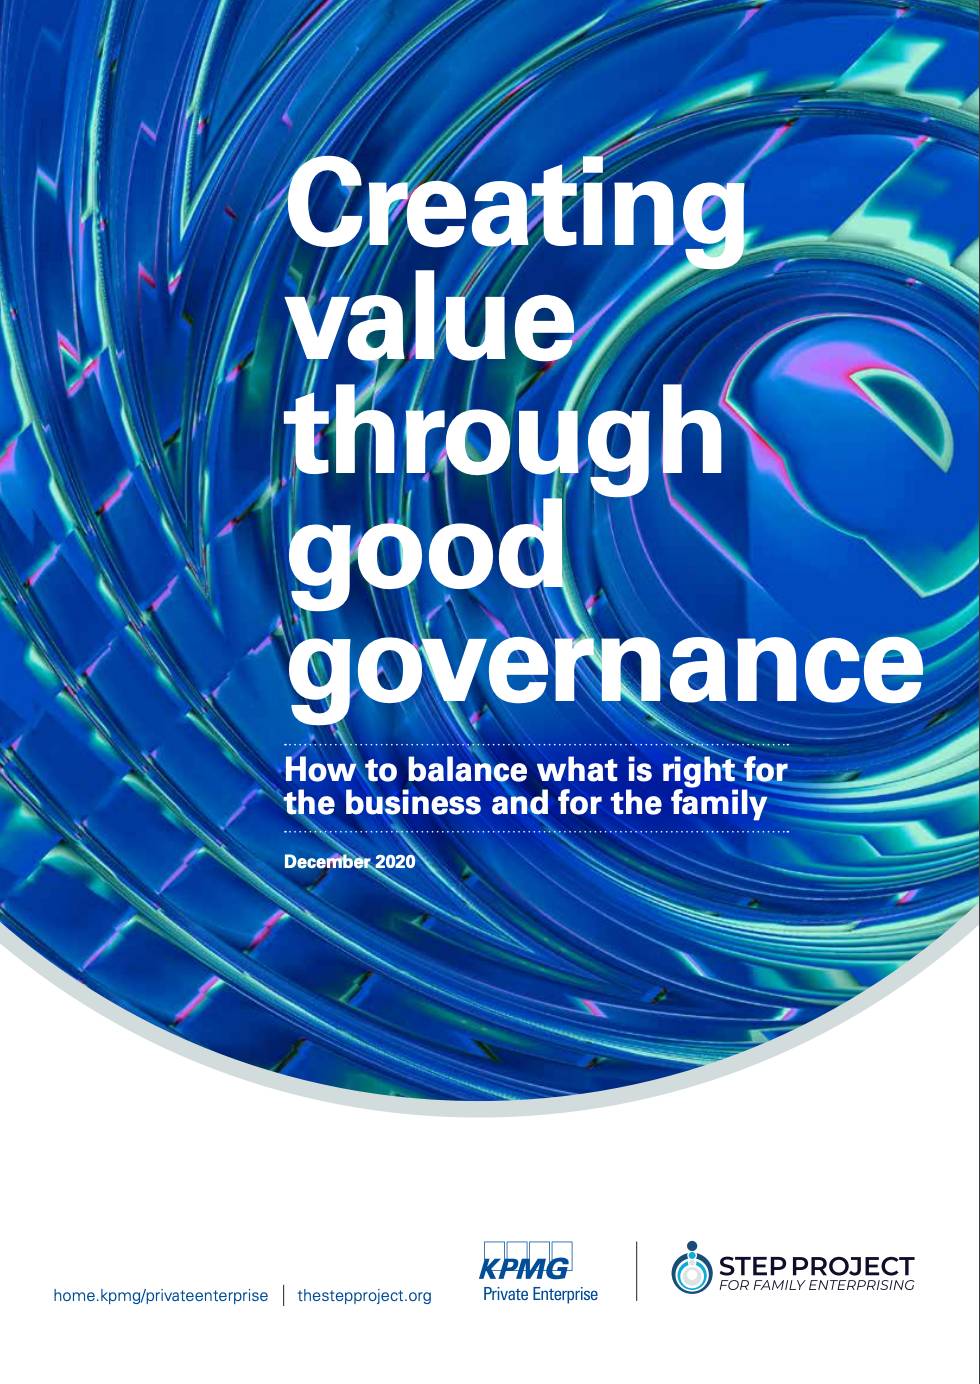 STEP Project "Creating Value Through Good Governance: How to balance what is right for the business and for the family" Article Cover